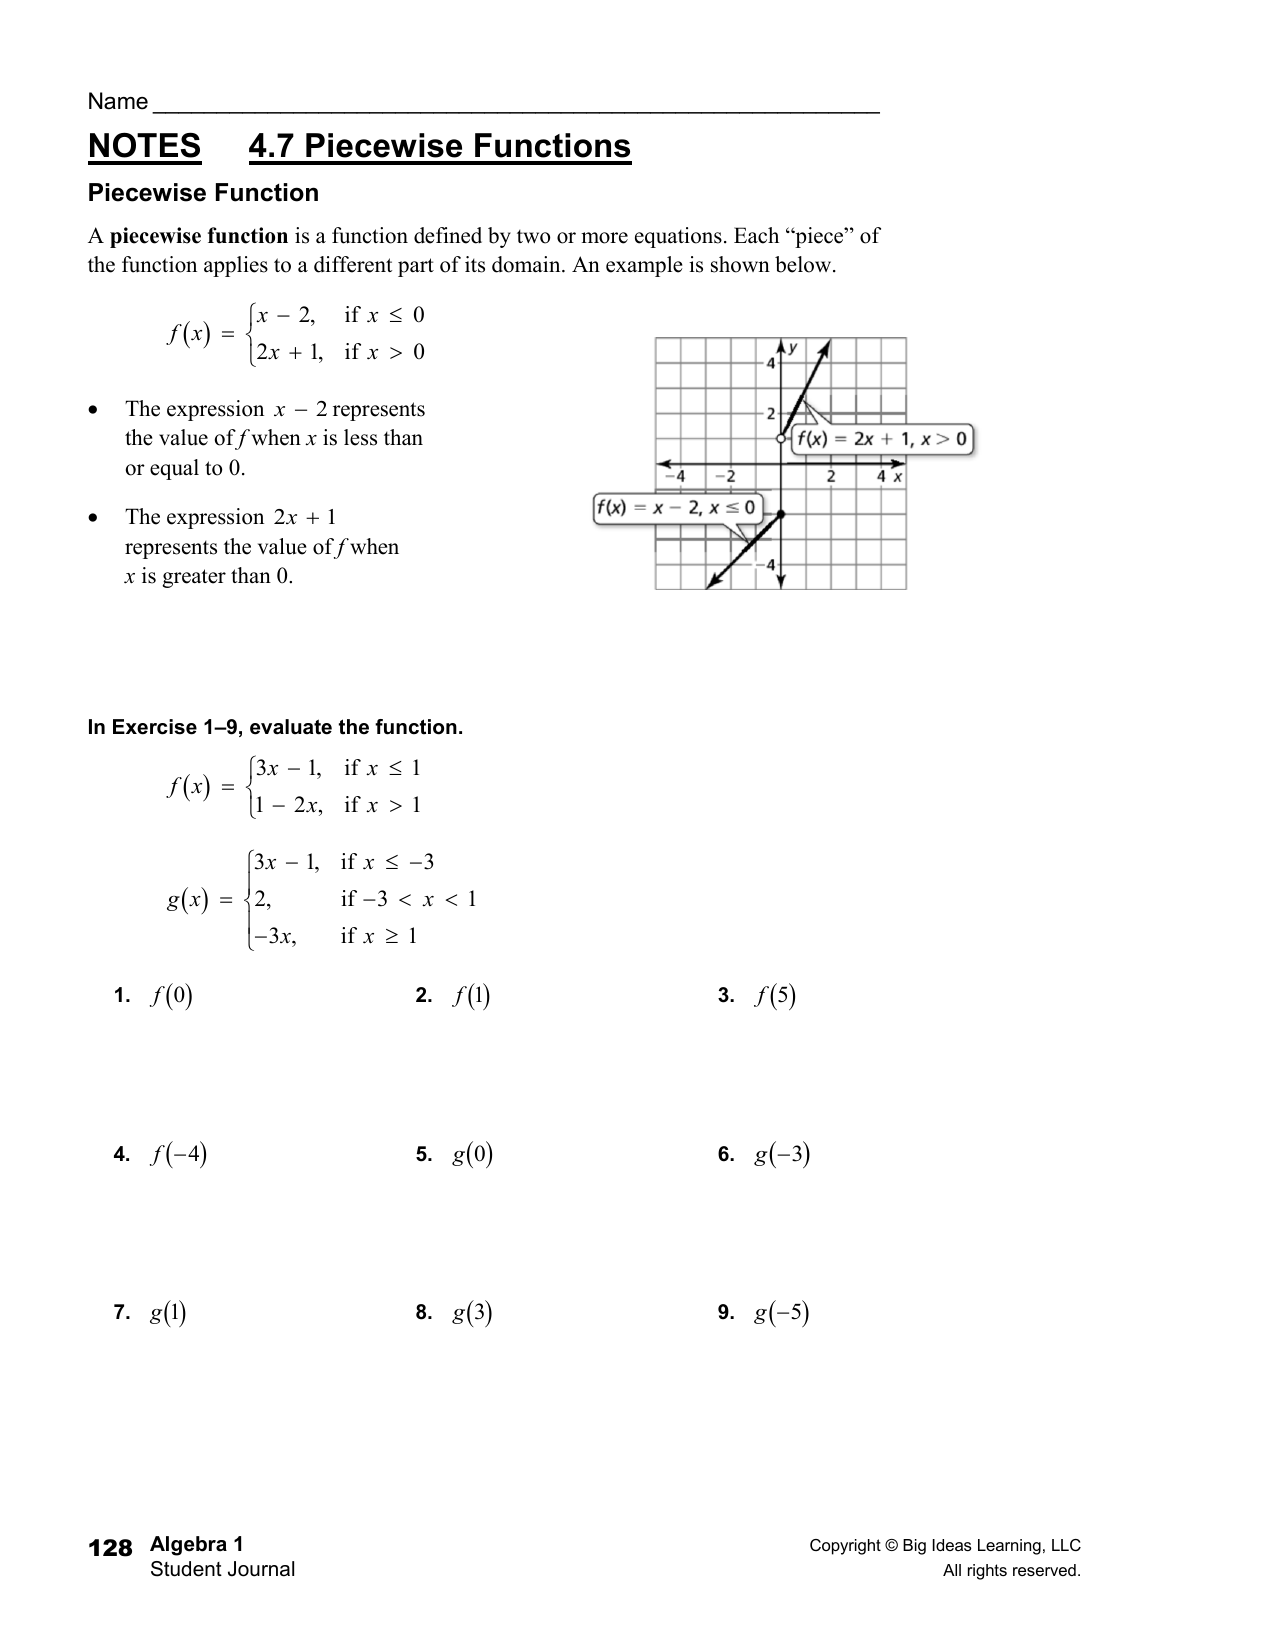 homework 2.4 applications of piecewise